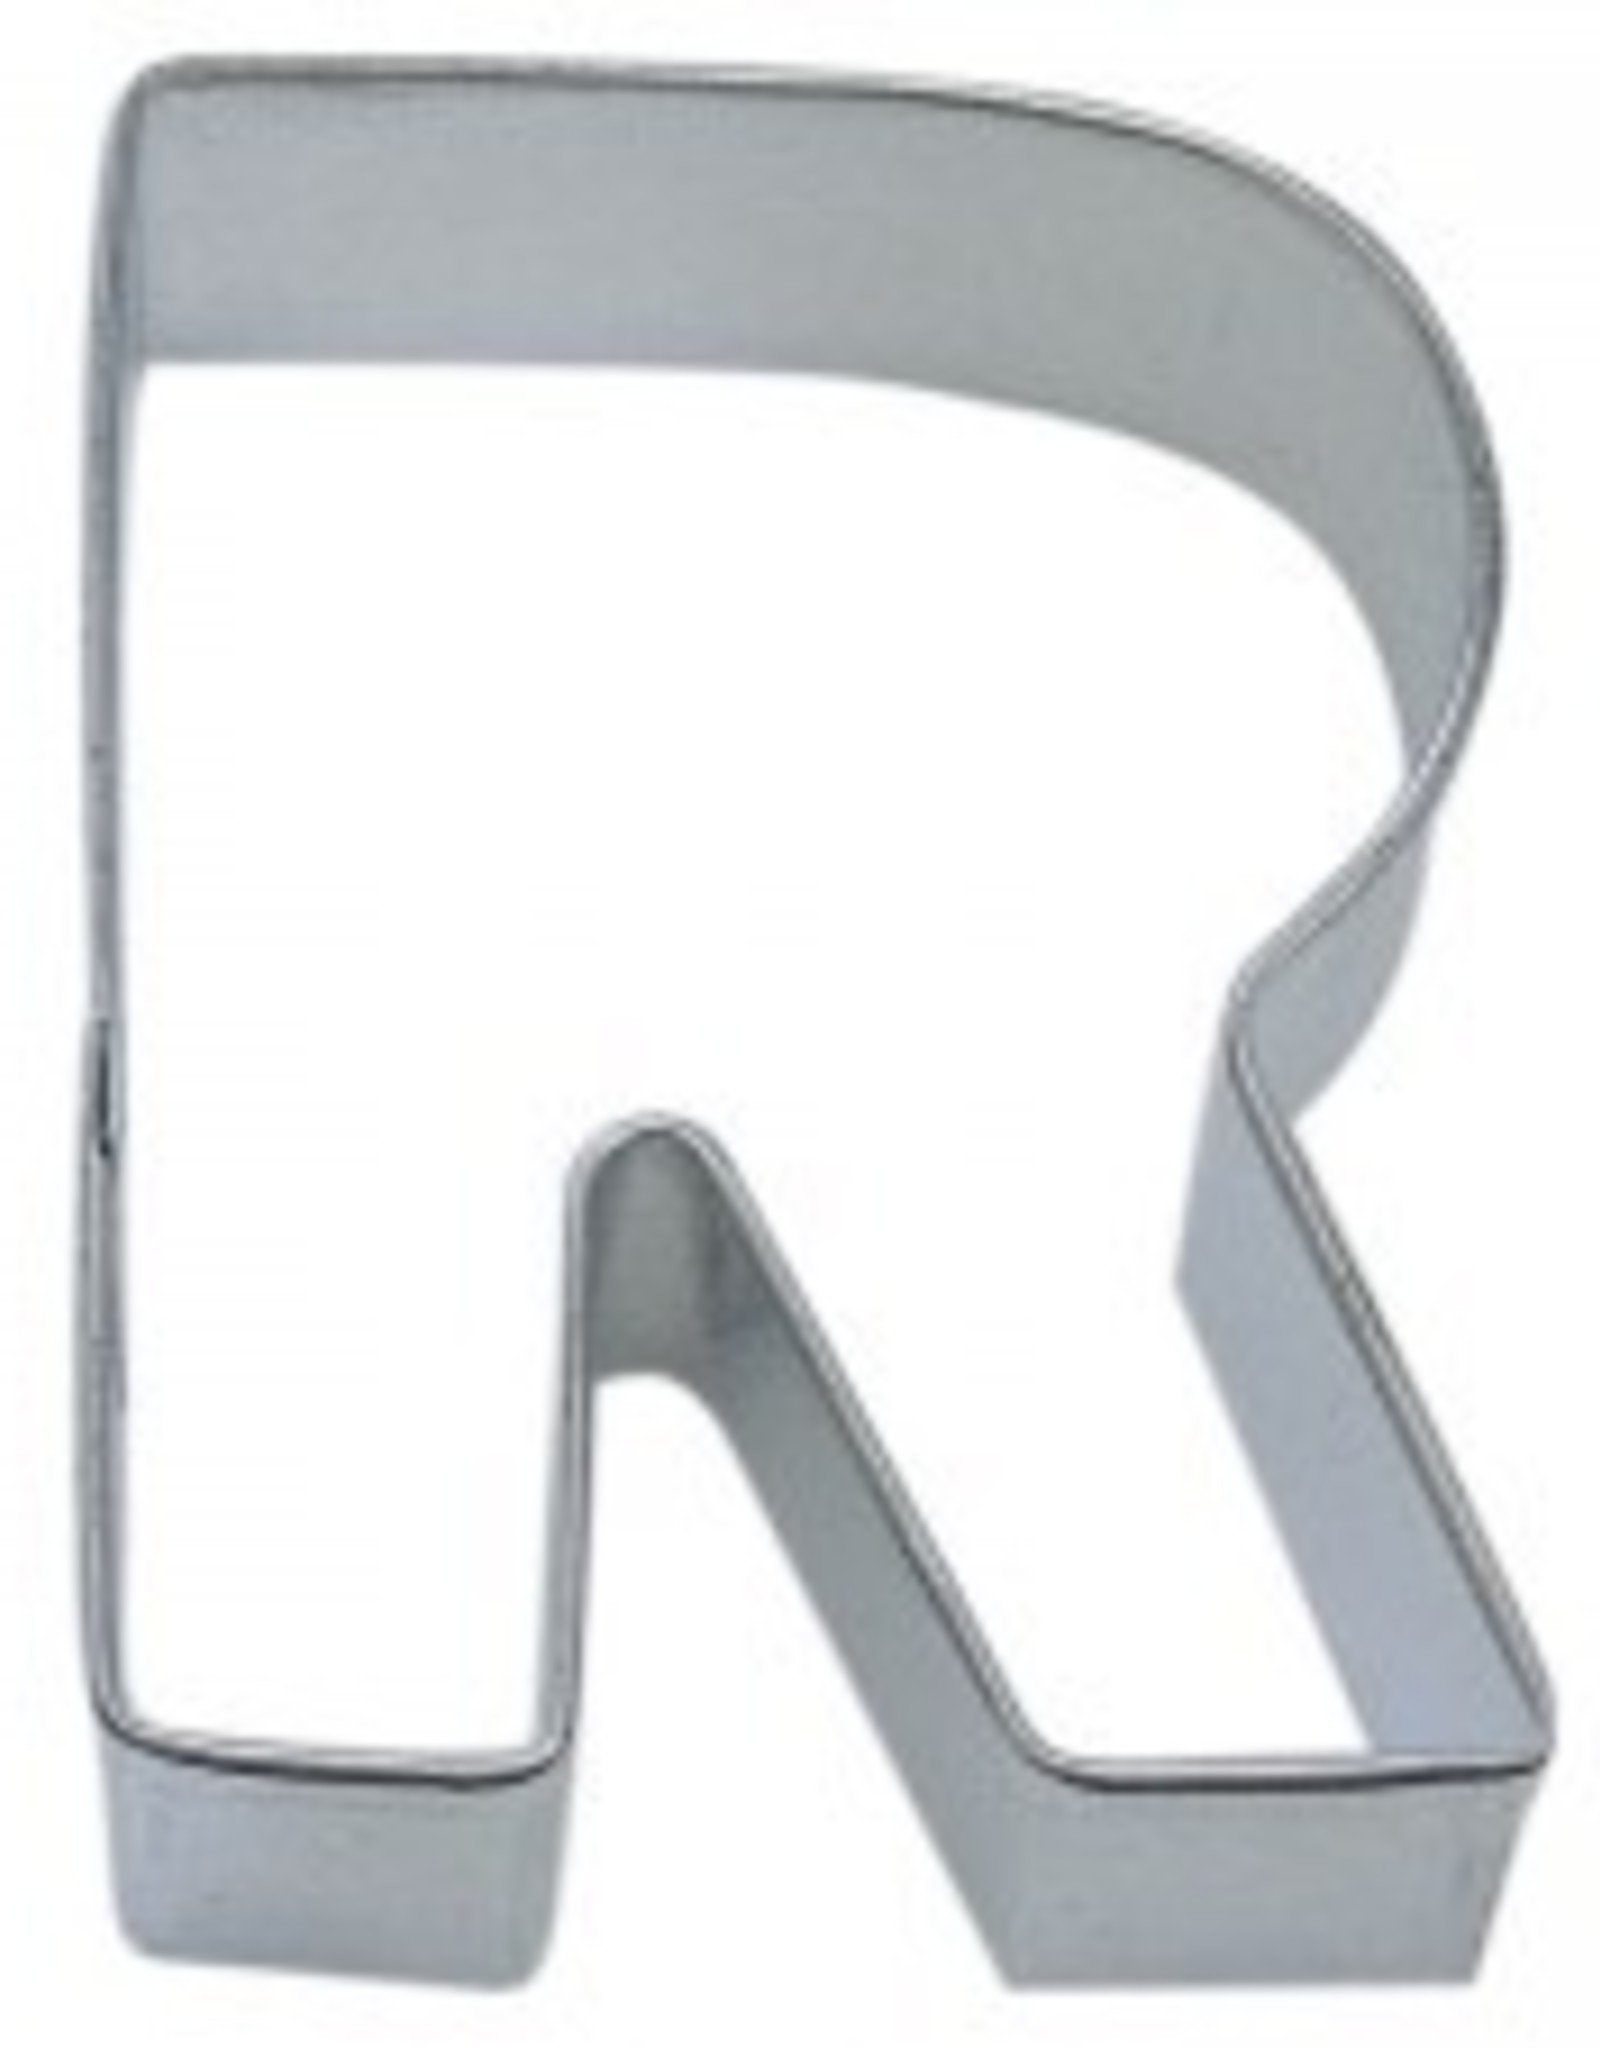 Letter "R" Cookie Cutter